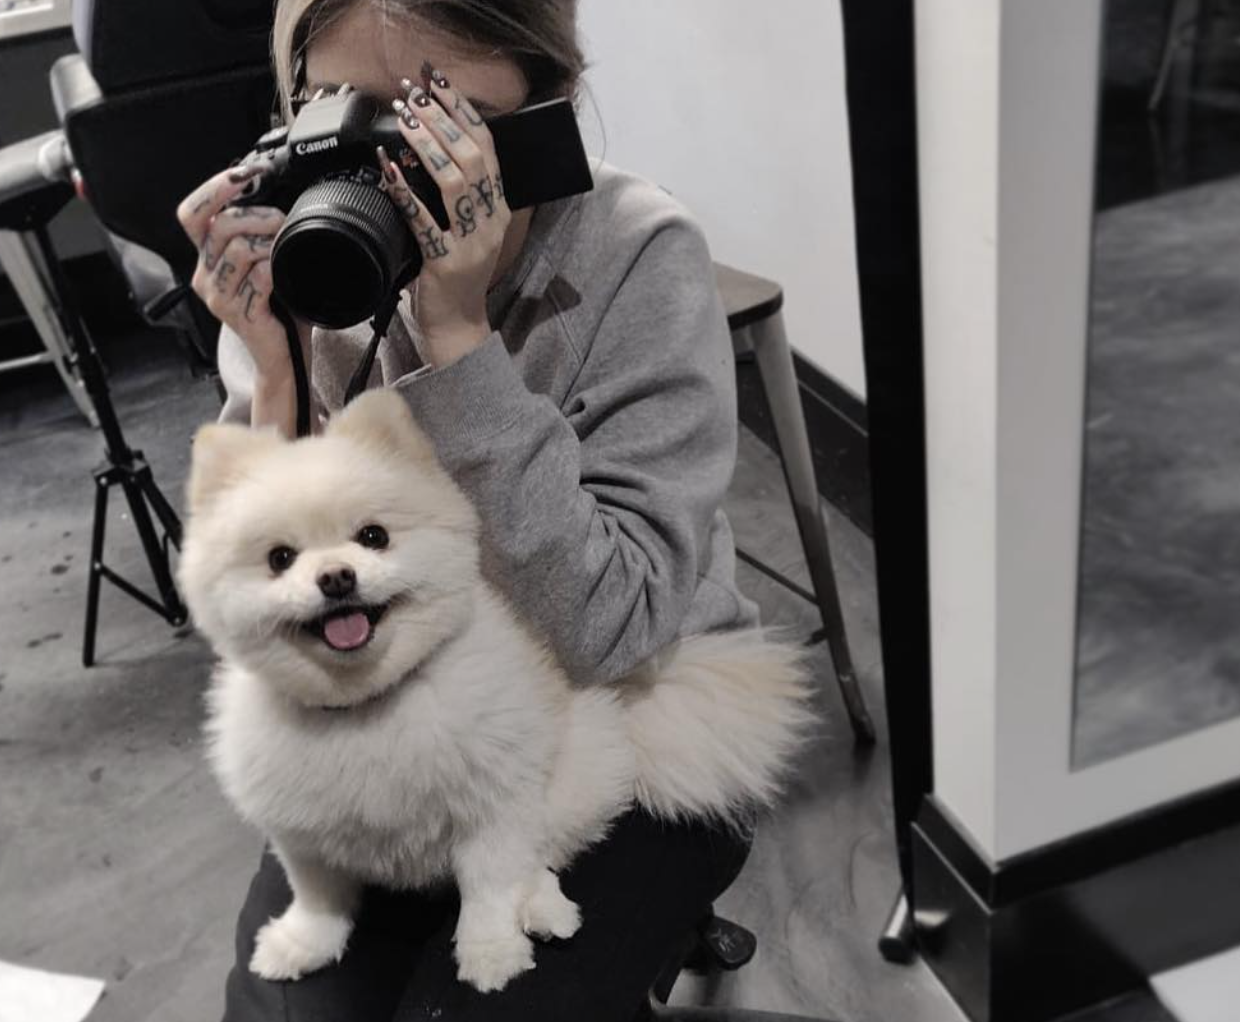 Nina Dinh and her dog Toby